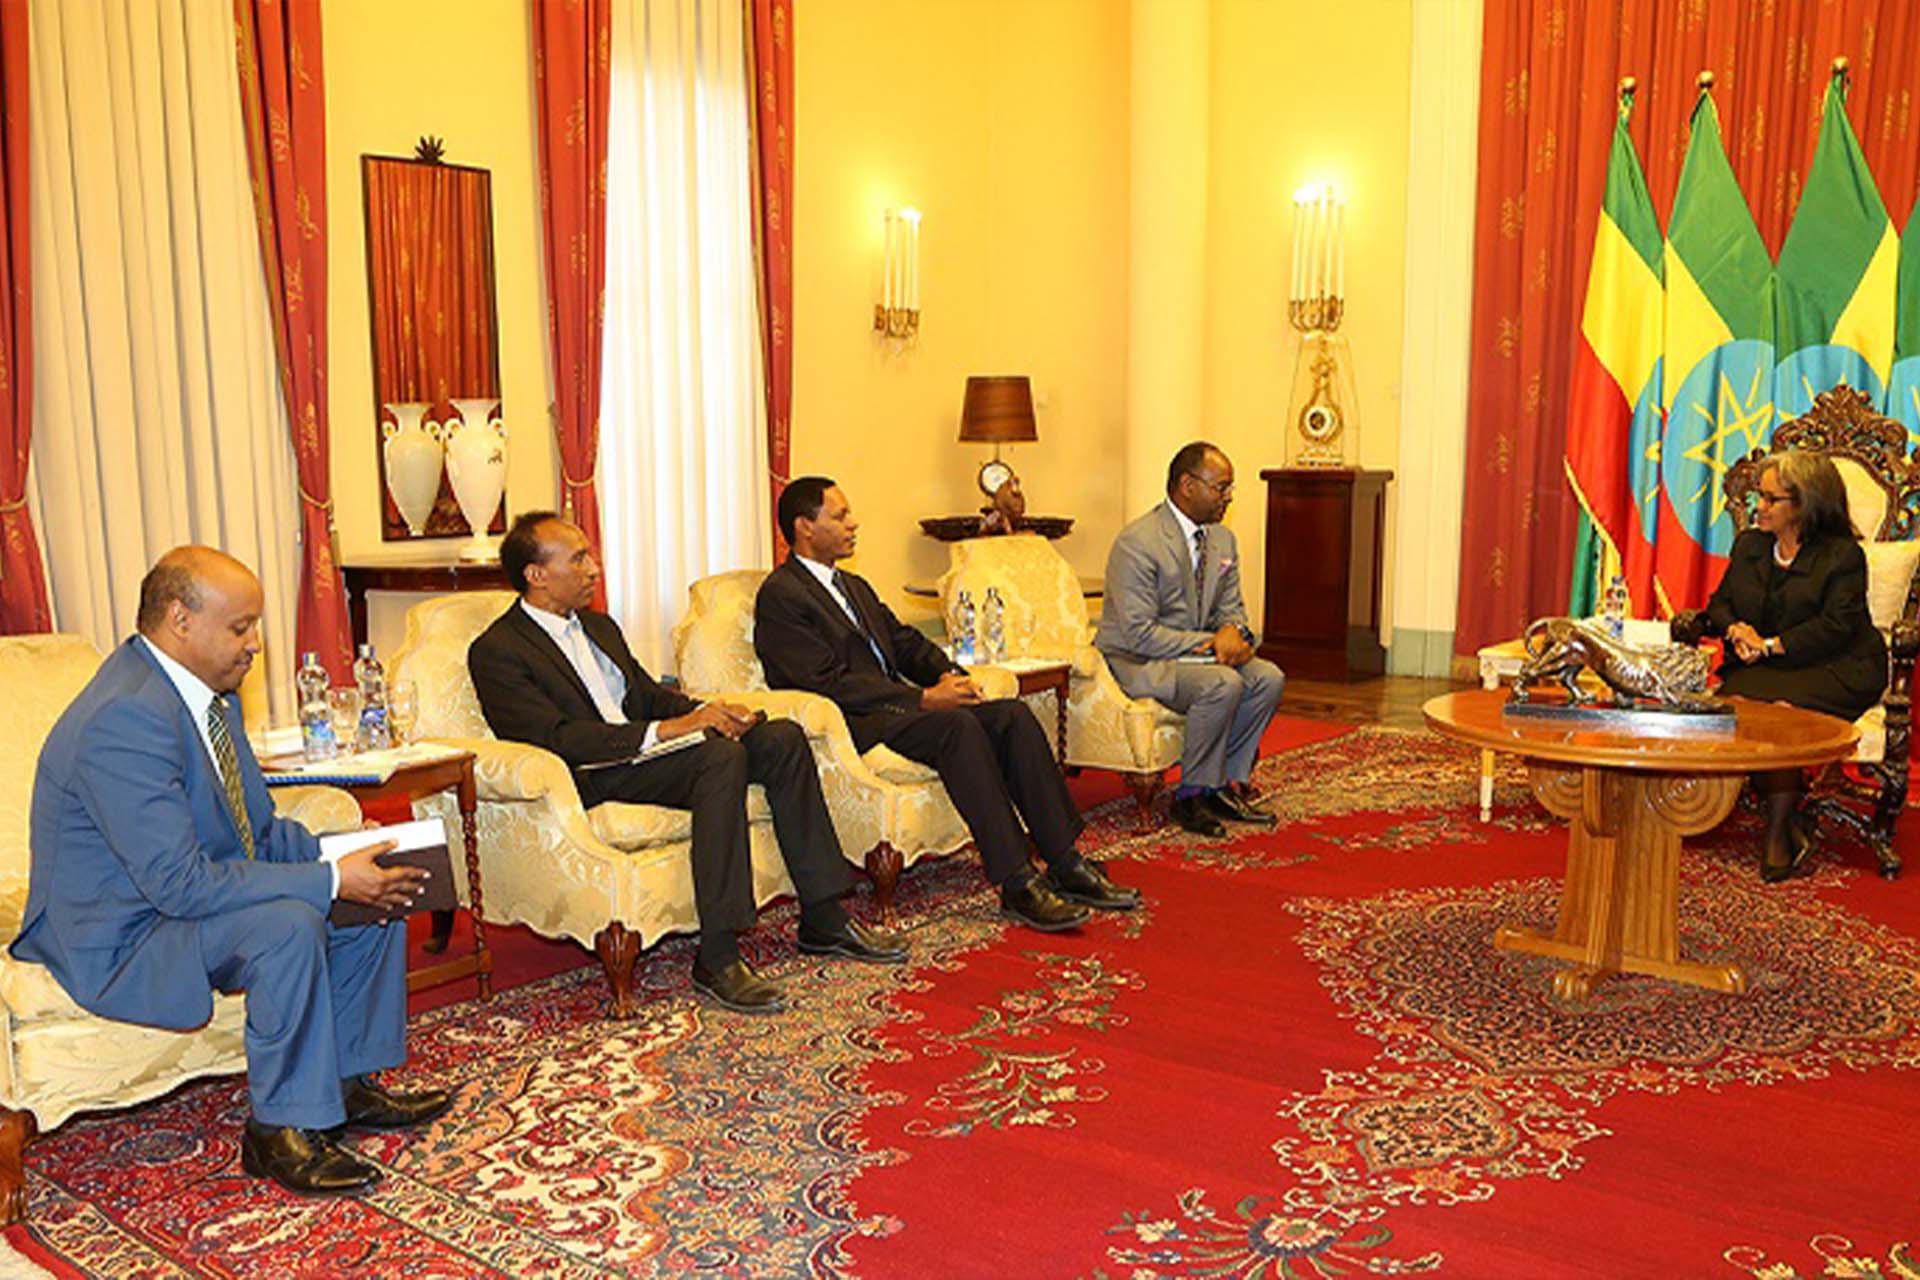 IGAD Cancer Initiative Seeks Support from the President of Ethiopia